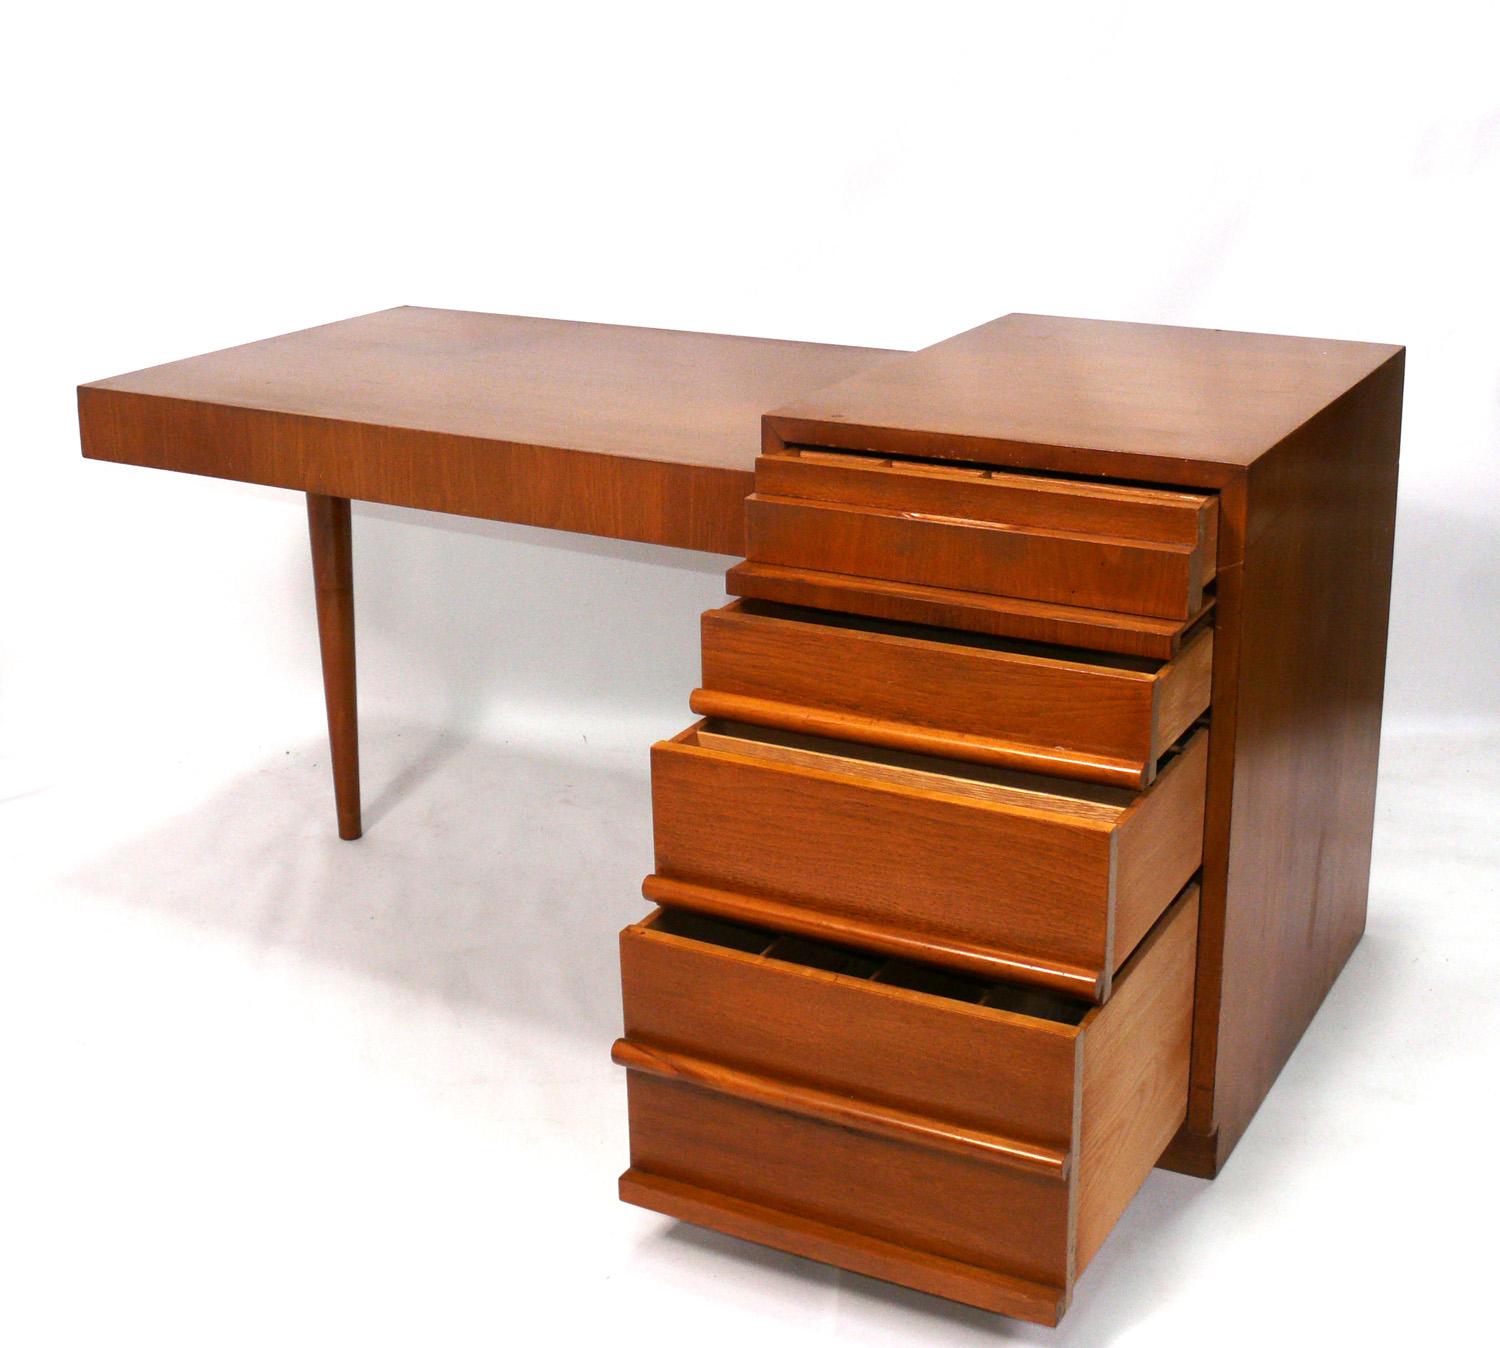 Clean lined cantilevered modern desk, designed by T.H. Robsjohn-Gibbings for Widdicomb, American, circa 1950s. This desk is currently being refinished and can be completed in your choice of finish color. The price noted below includes refinishing in